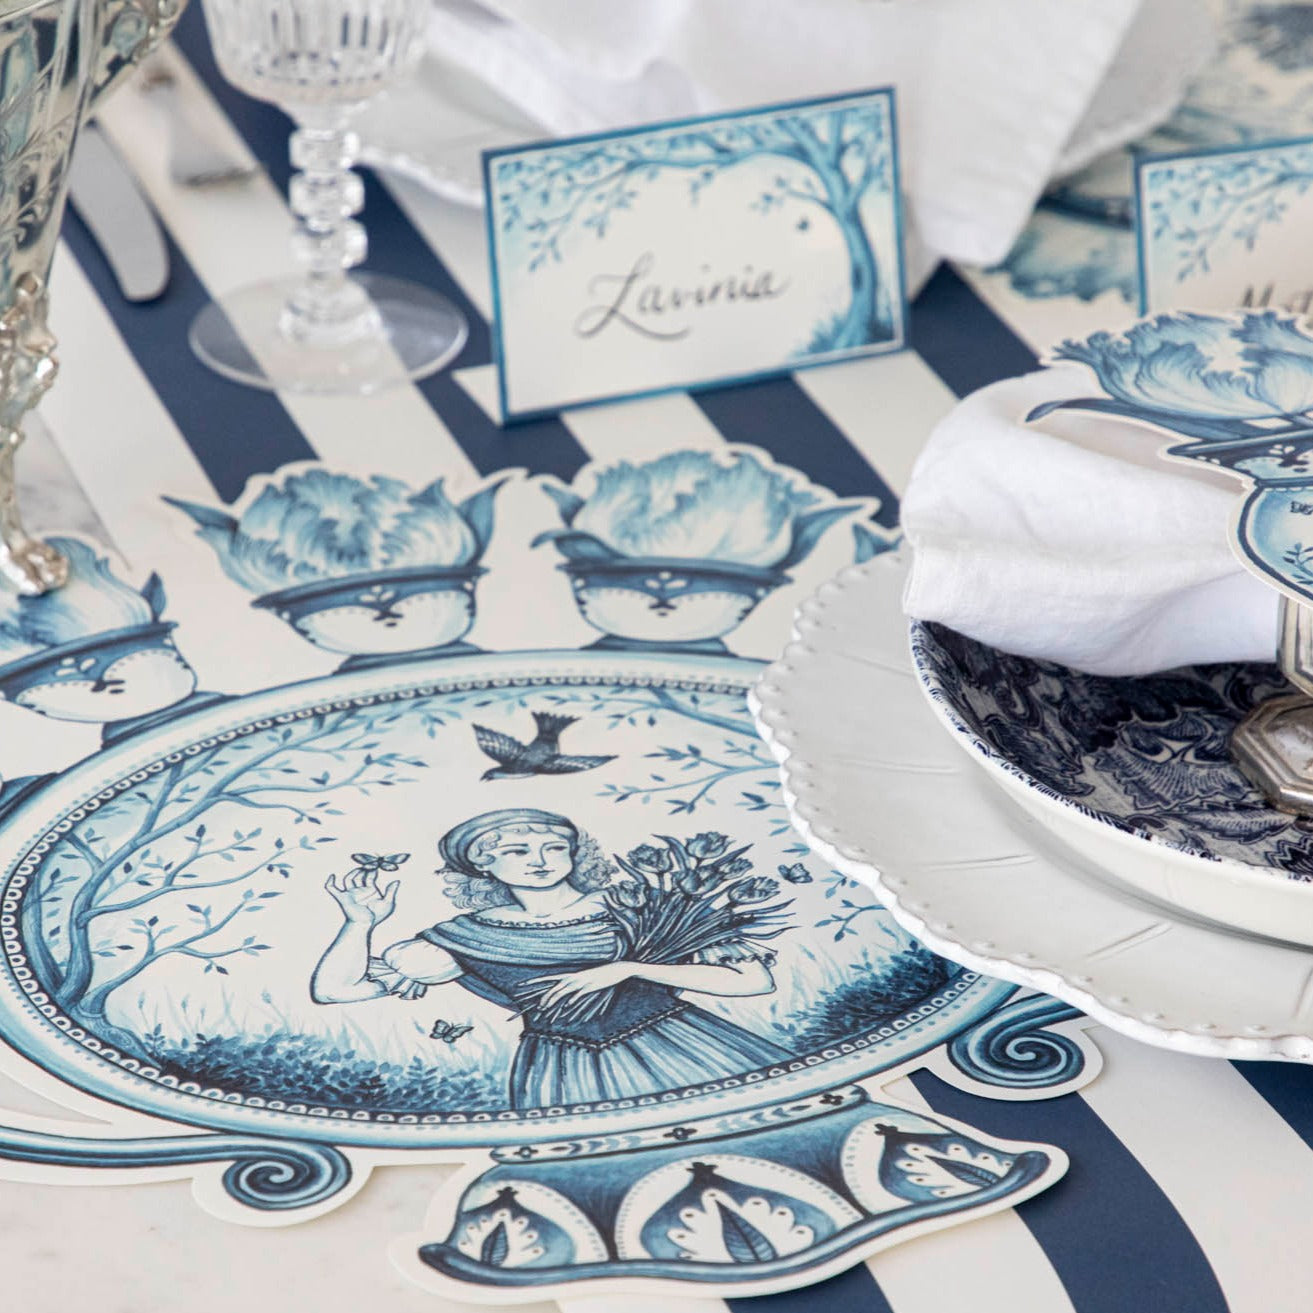 The Die-cut Indigo Meadow Placemat under an elegant place setting.